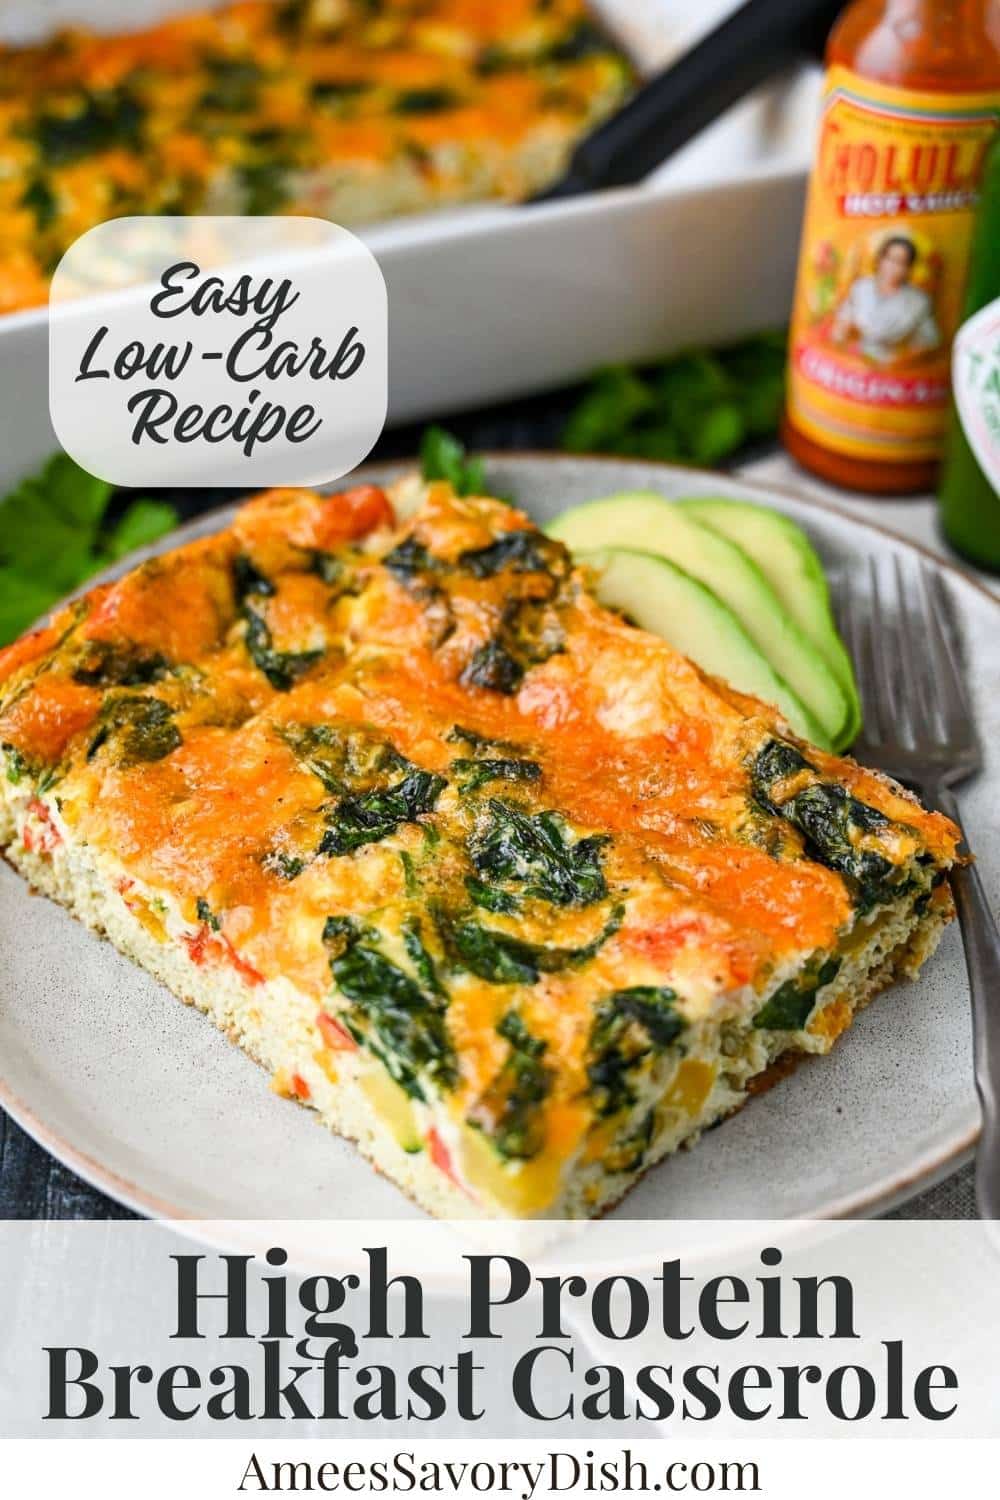 This high-protein breakfast casserole is nutritious and incredibly satisfying, packed with wholesome ingredients like whole eggs, egg whites, cheese, and a medley of colorful veggies. via @Ameessavorydish